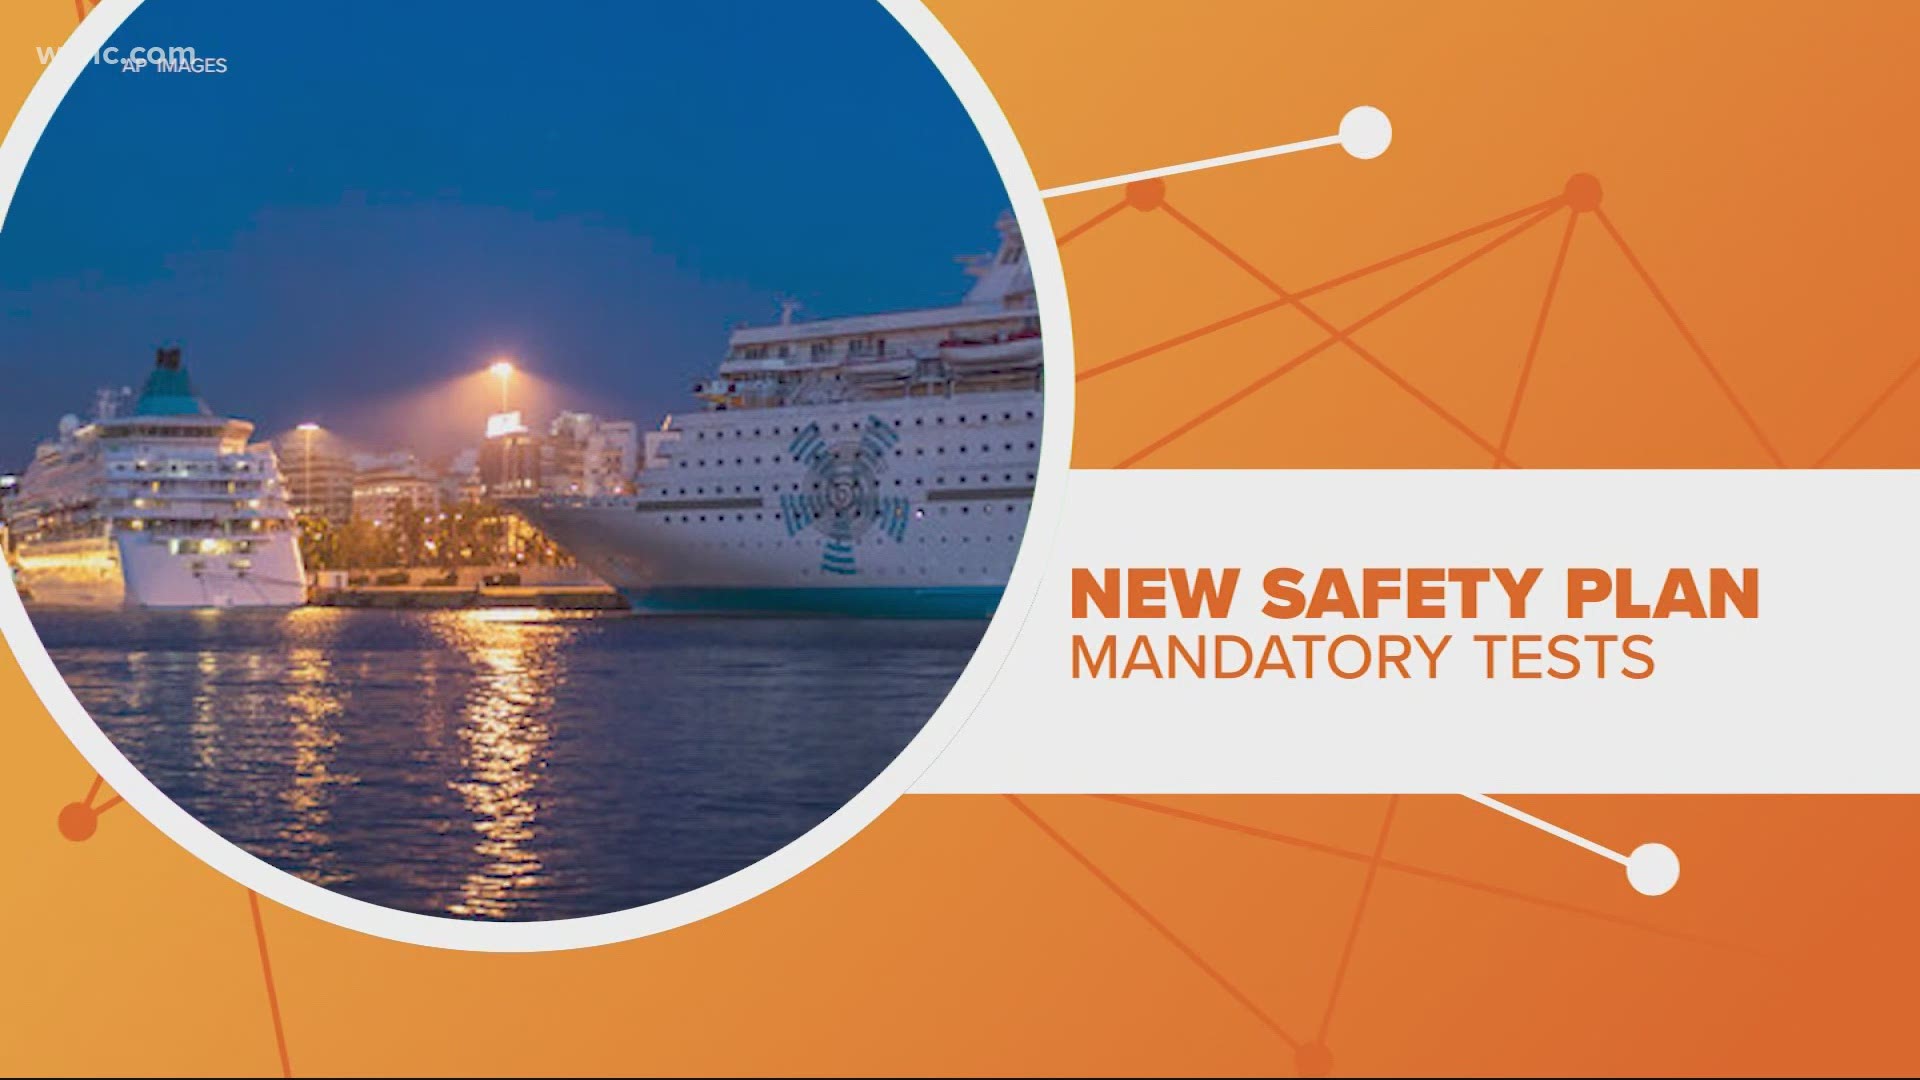 The cruise industry is putting new safety measures in place to protect employees and passengers.